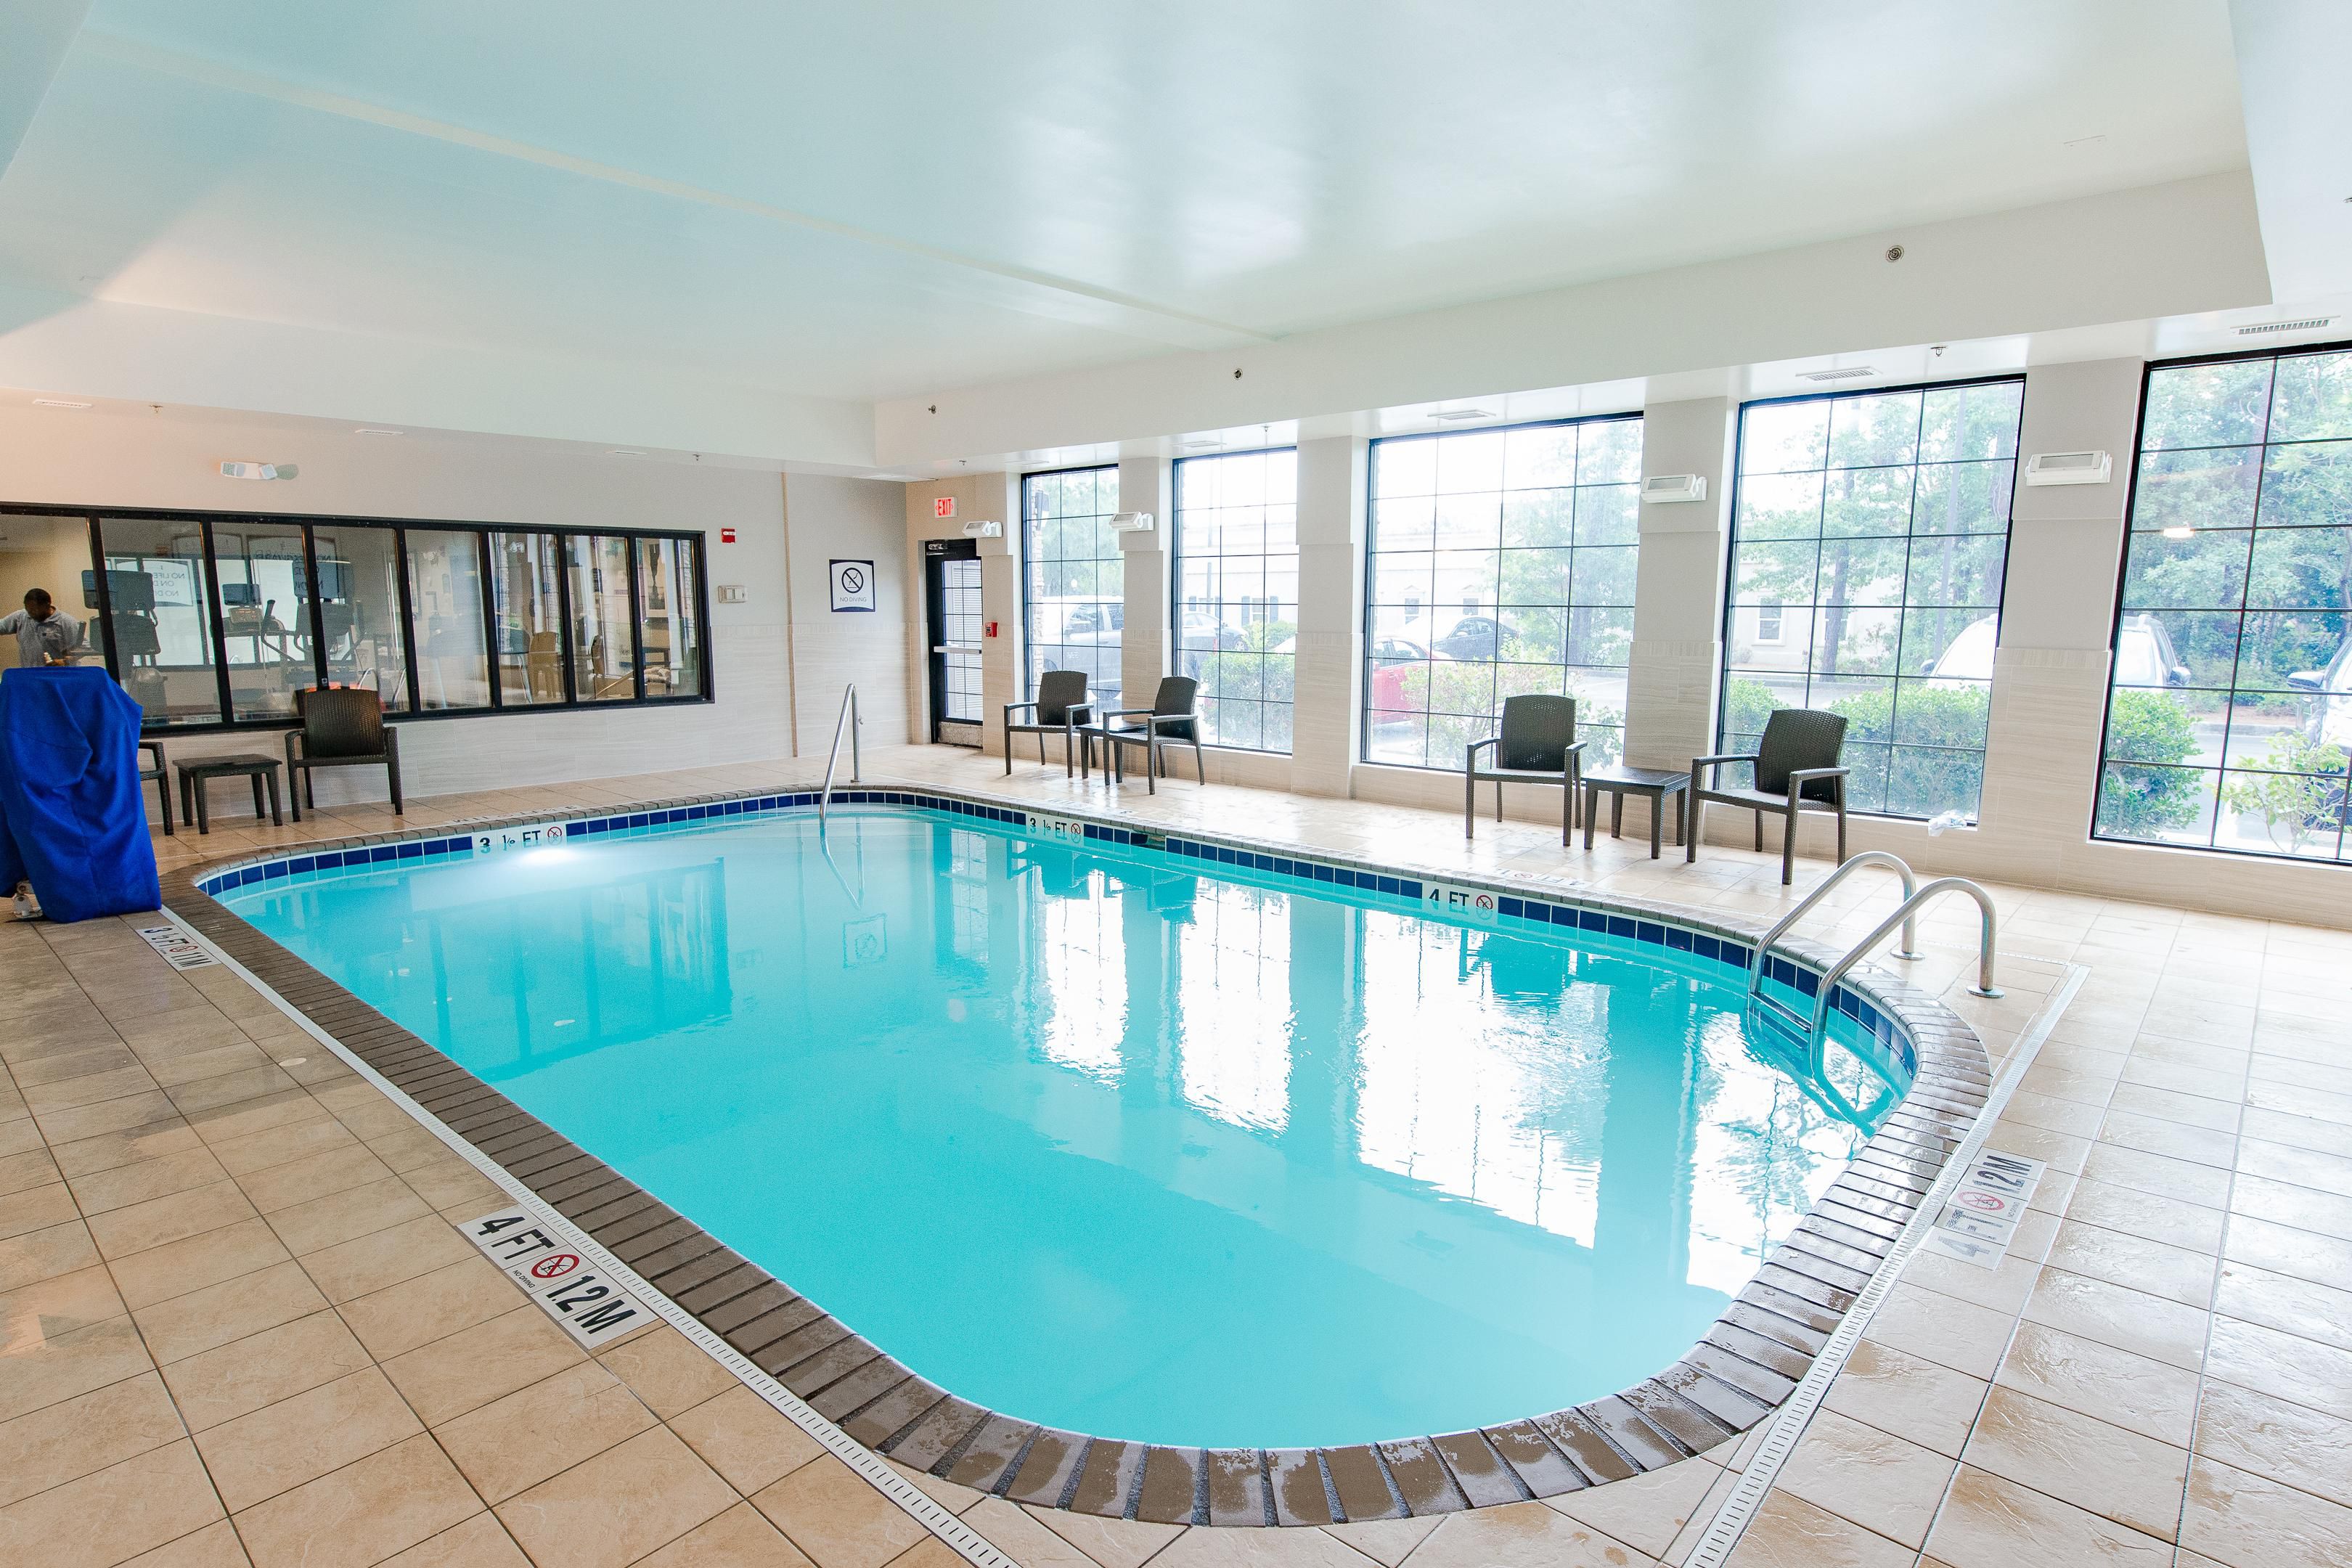 Enjoy our heated pool available from 8 am to 10 pm.